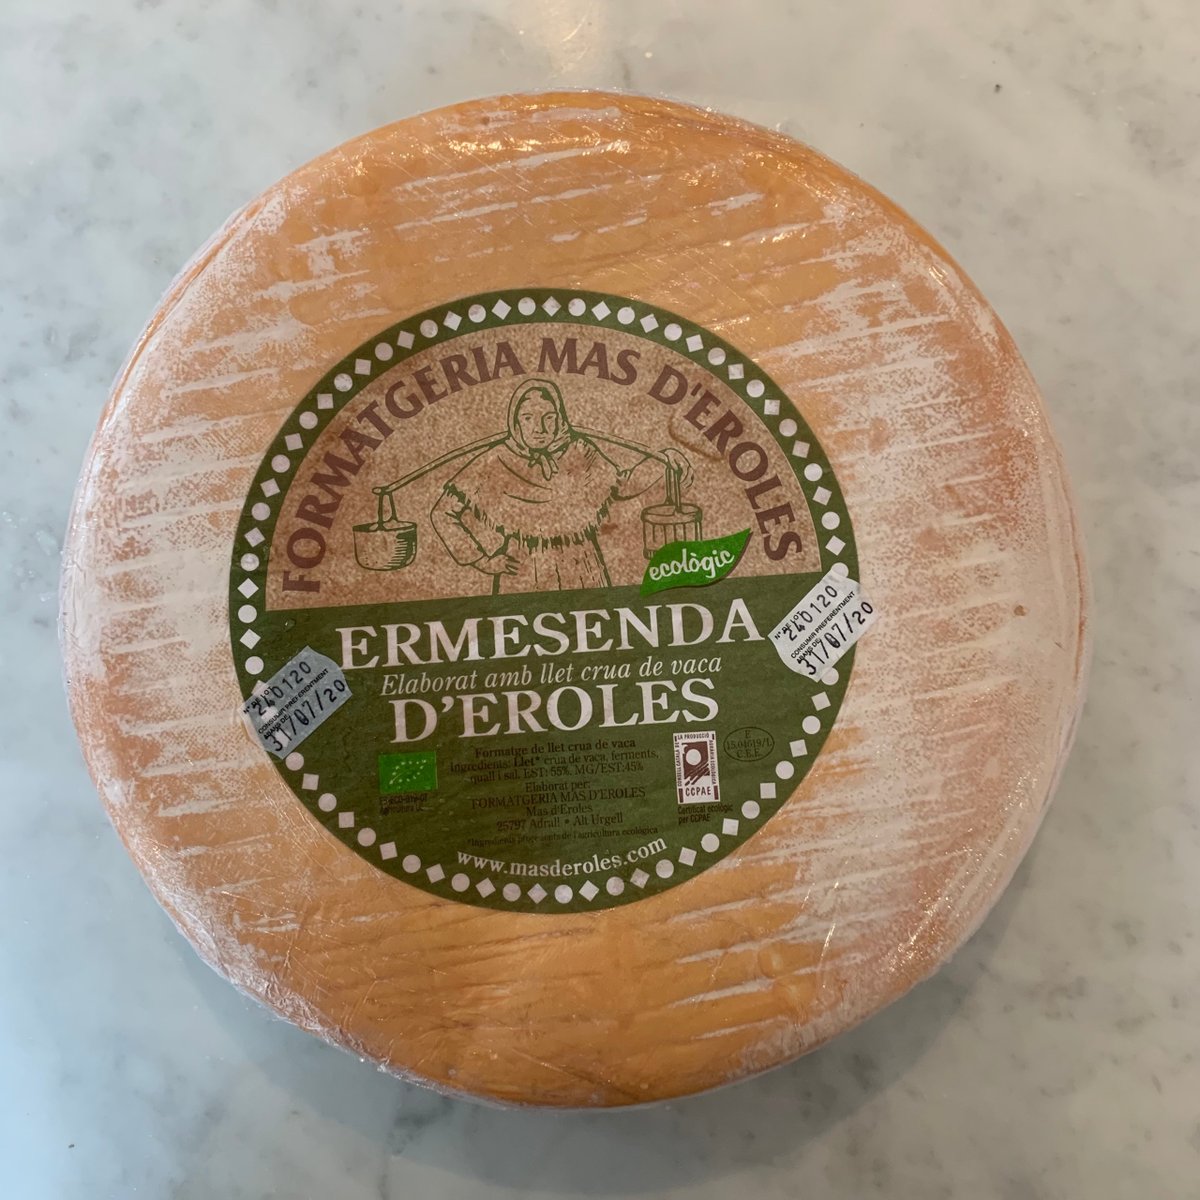 We’re still slicing our amazing artisan meats and cheeses from Spain. Next delivery tomorrow. #shoplocal #shopmiddlestreetbrixham — at The Wine Loft Brixham.